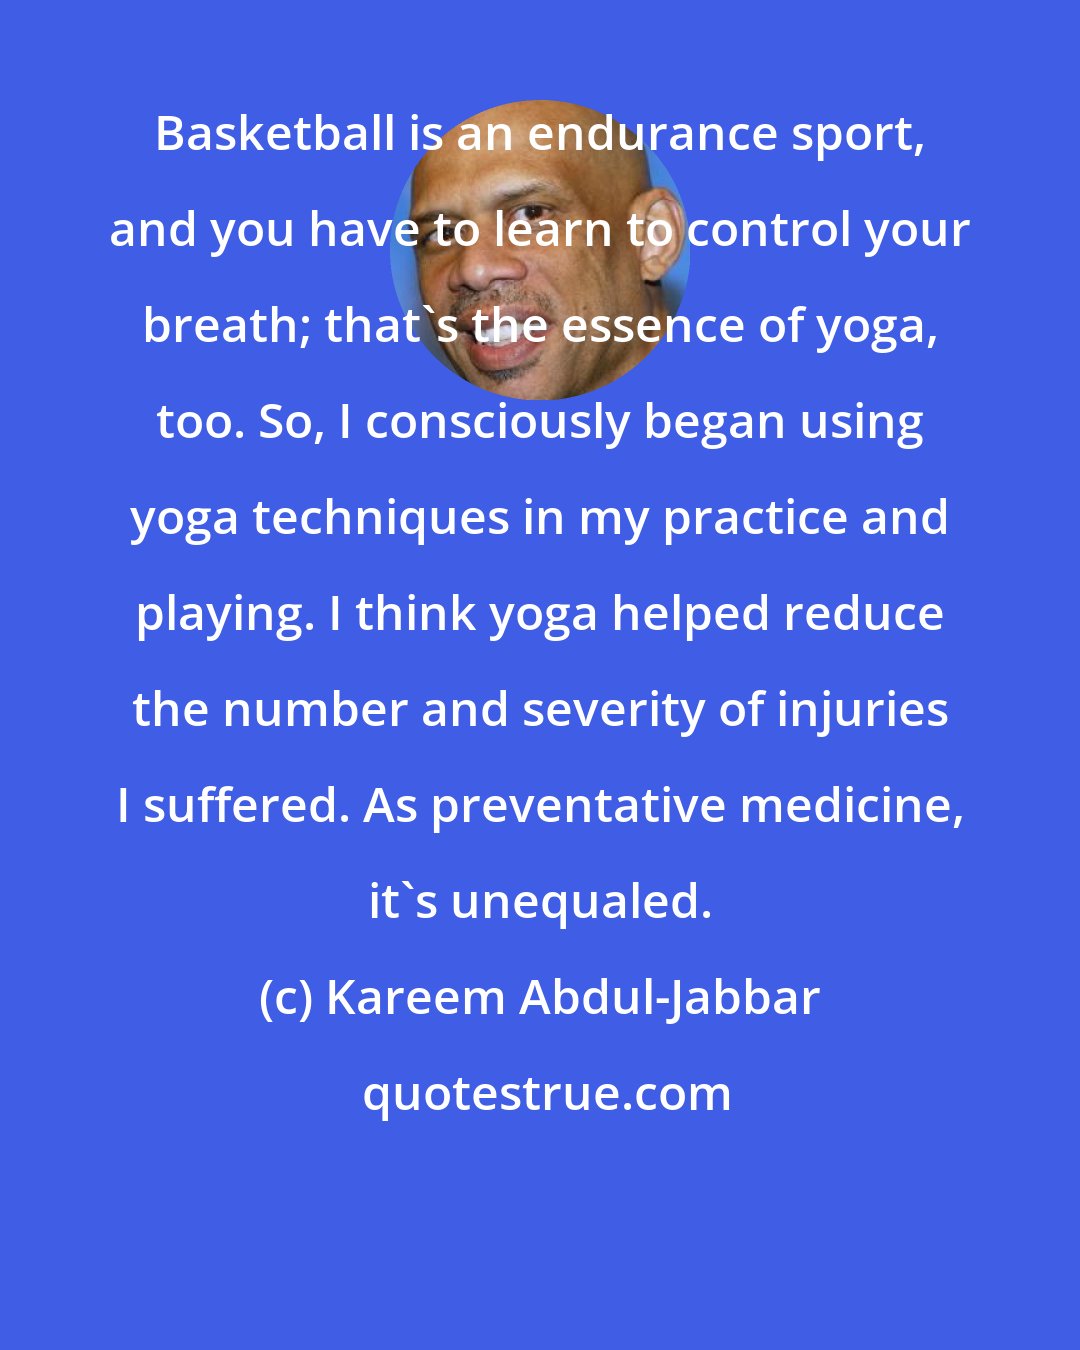 Kareem Abdul-Jabbar: Basketball is an endurance sport, and you have to learn to control your breath; that's the essence of yoga, too. So, I consciously began using yoga techniques in my practice and playing. I think yoga helped reduce the number and severity of injuries I suffered. As preventative medicine, it's unequaled.